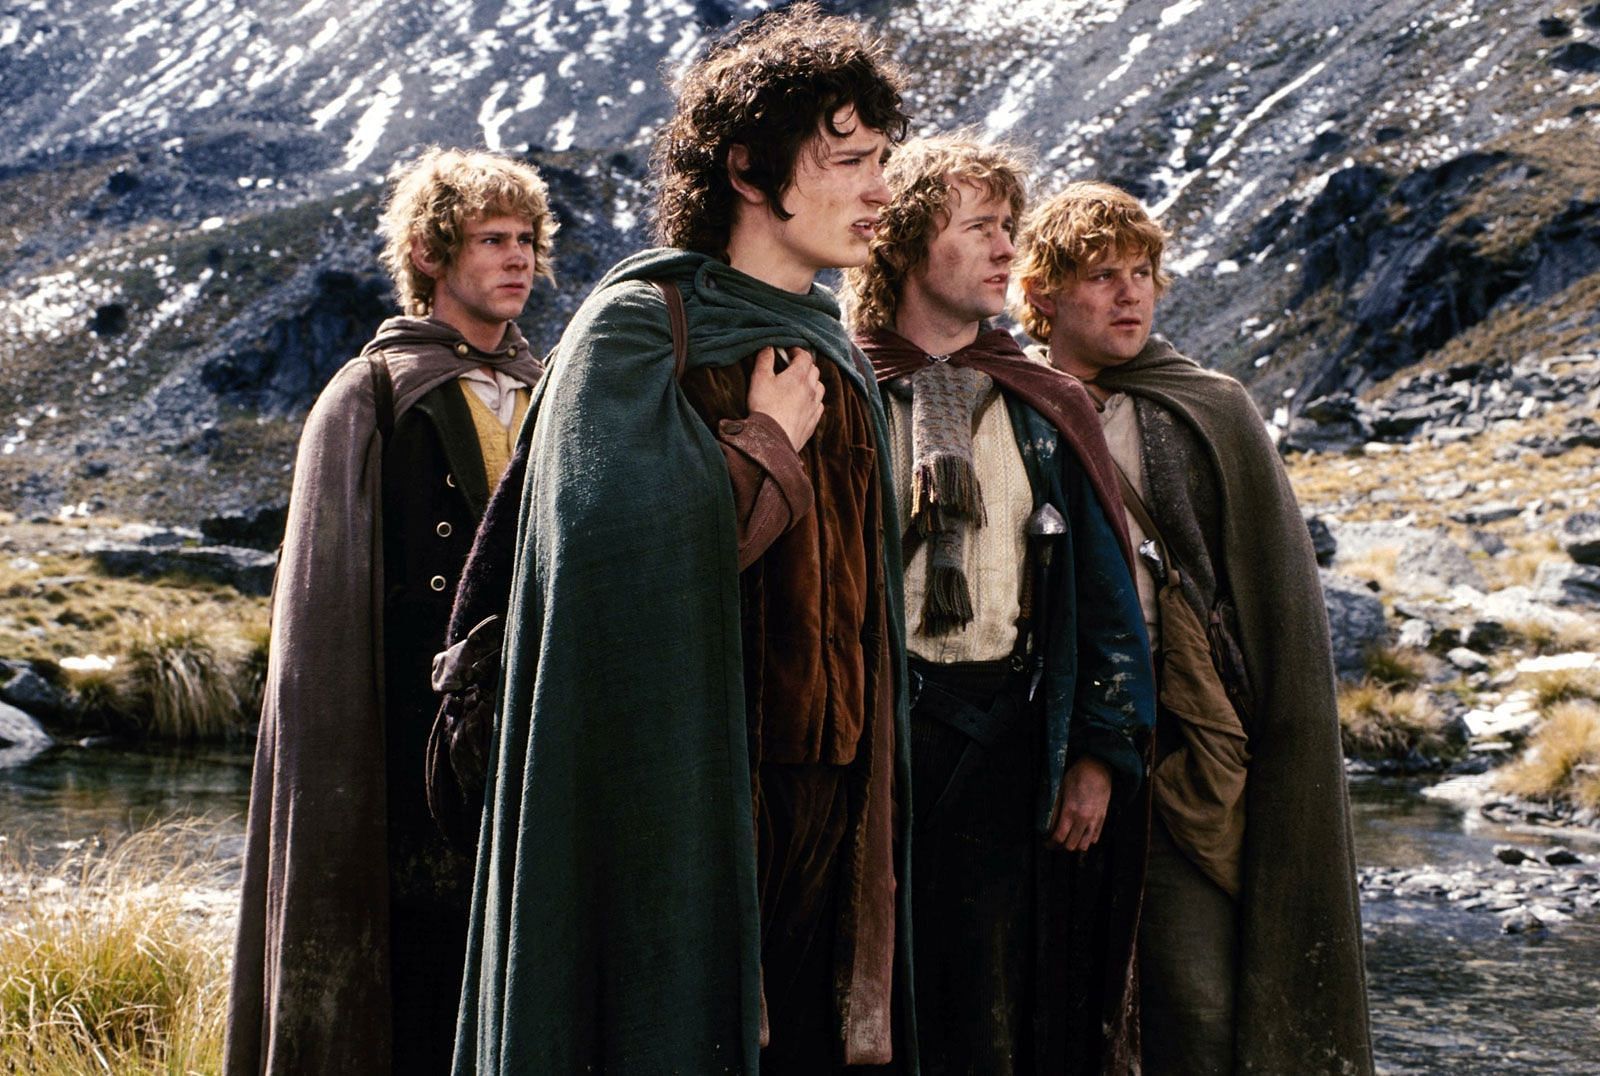 The Lord of the Rings: The Fellowship of the Ring (Image via IMDB)